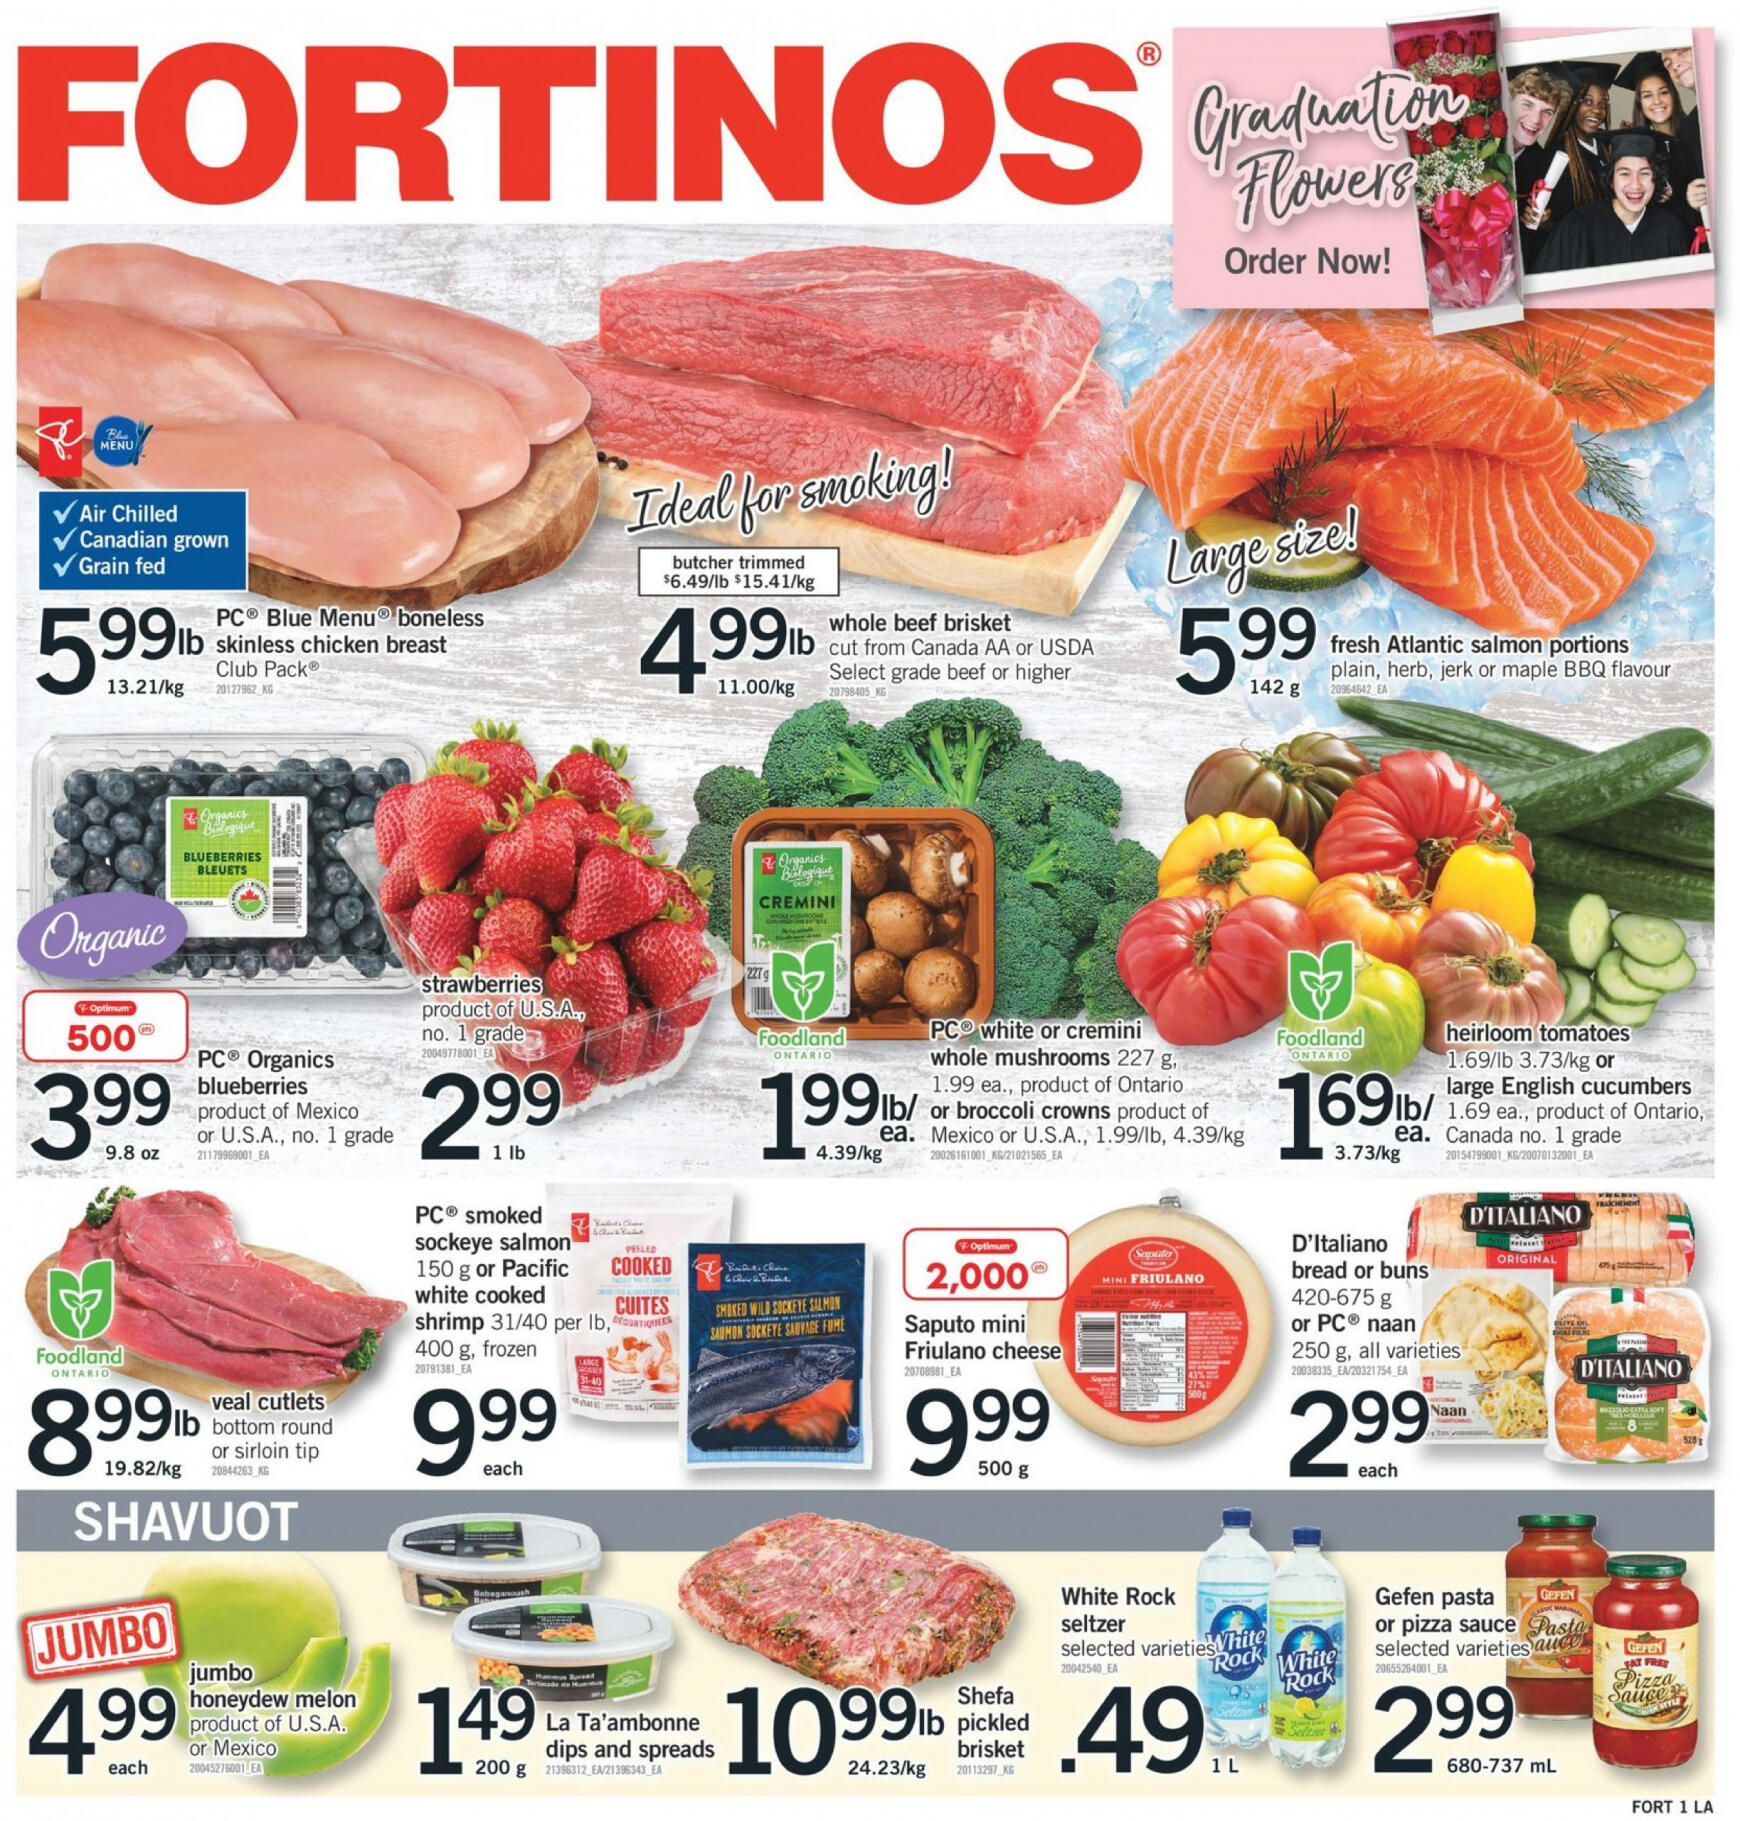 fortinos - Fortinos flyer current 06.06. - 12.06.